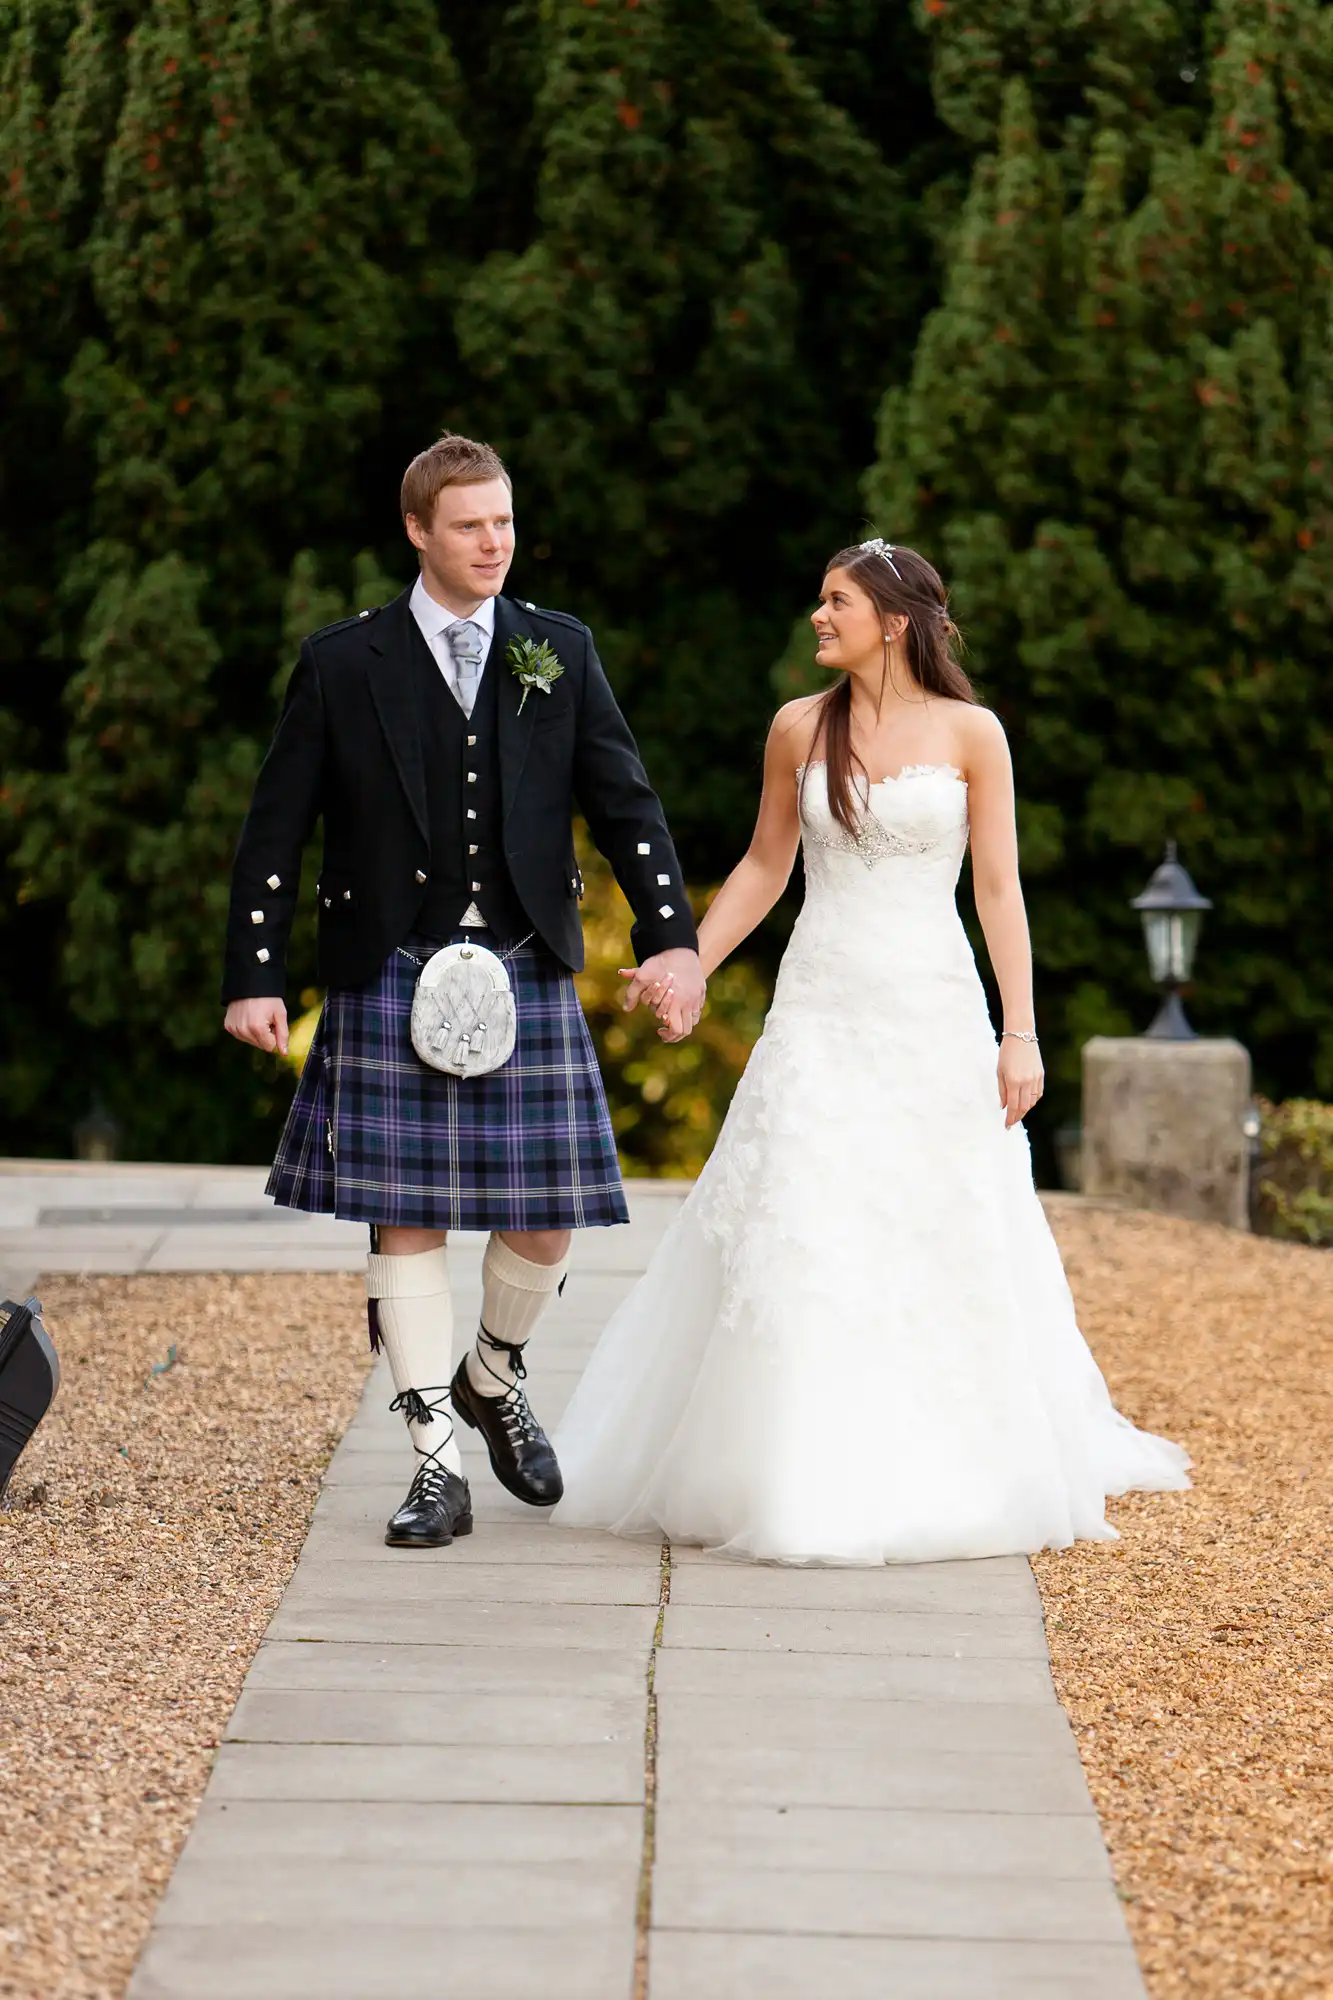 A bride in a white gown and a groom in a traditional scottish kilt and jacket walk hand in hand on a garden path.